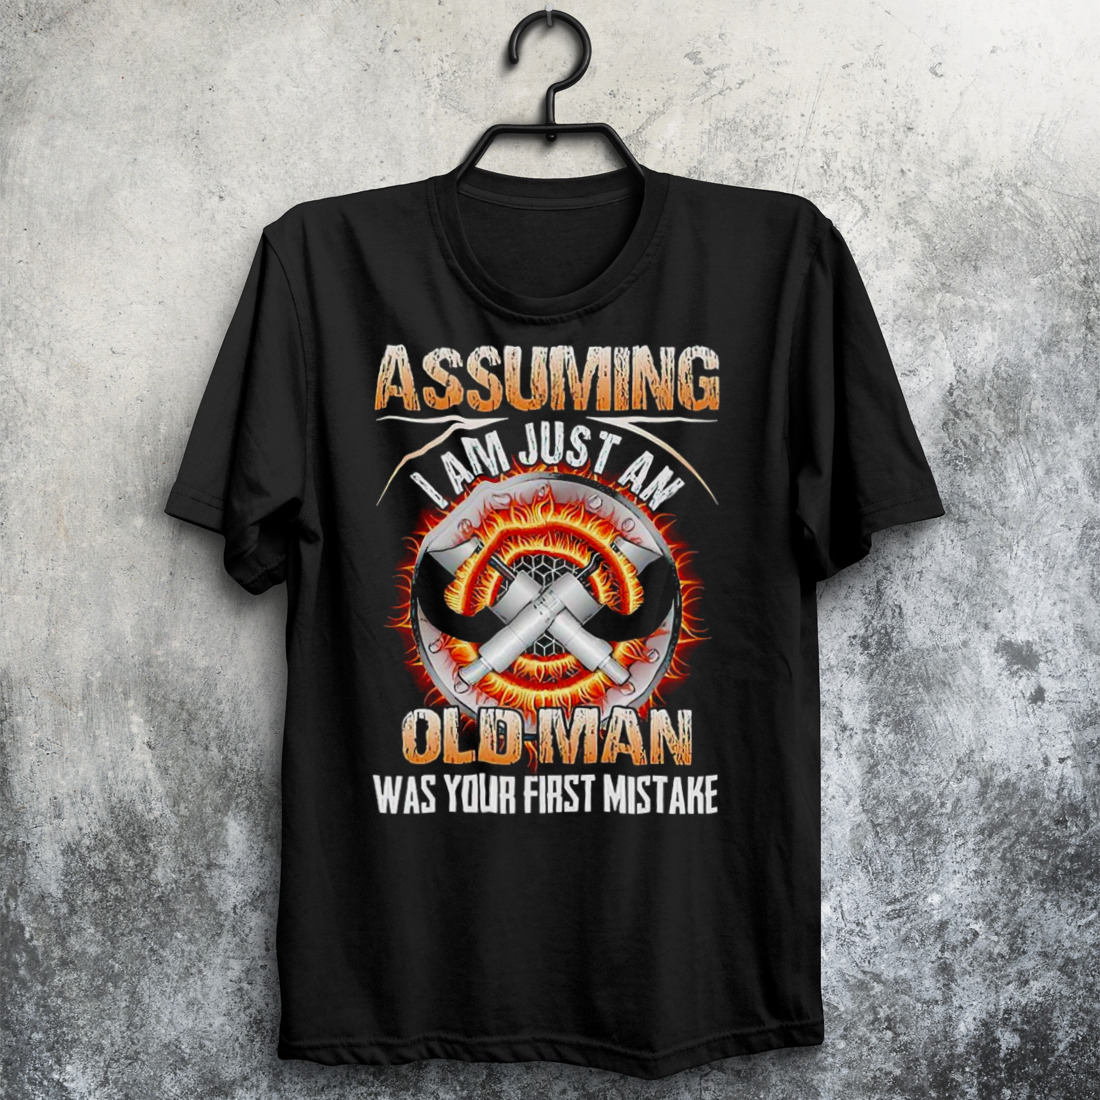 Assuming I am just an old man was your first mistake T-shirt